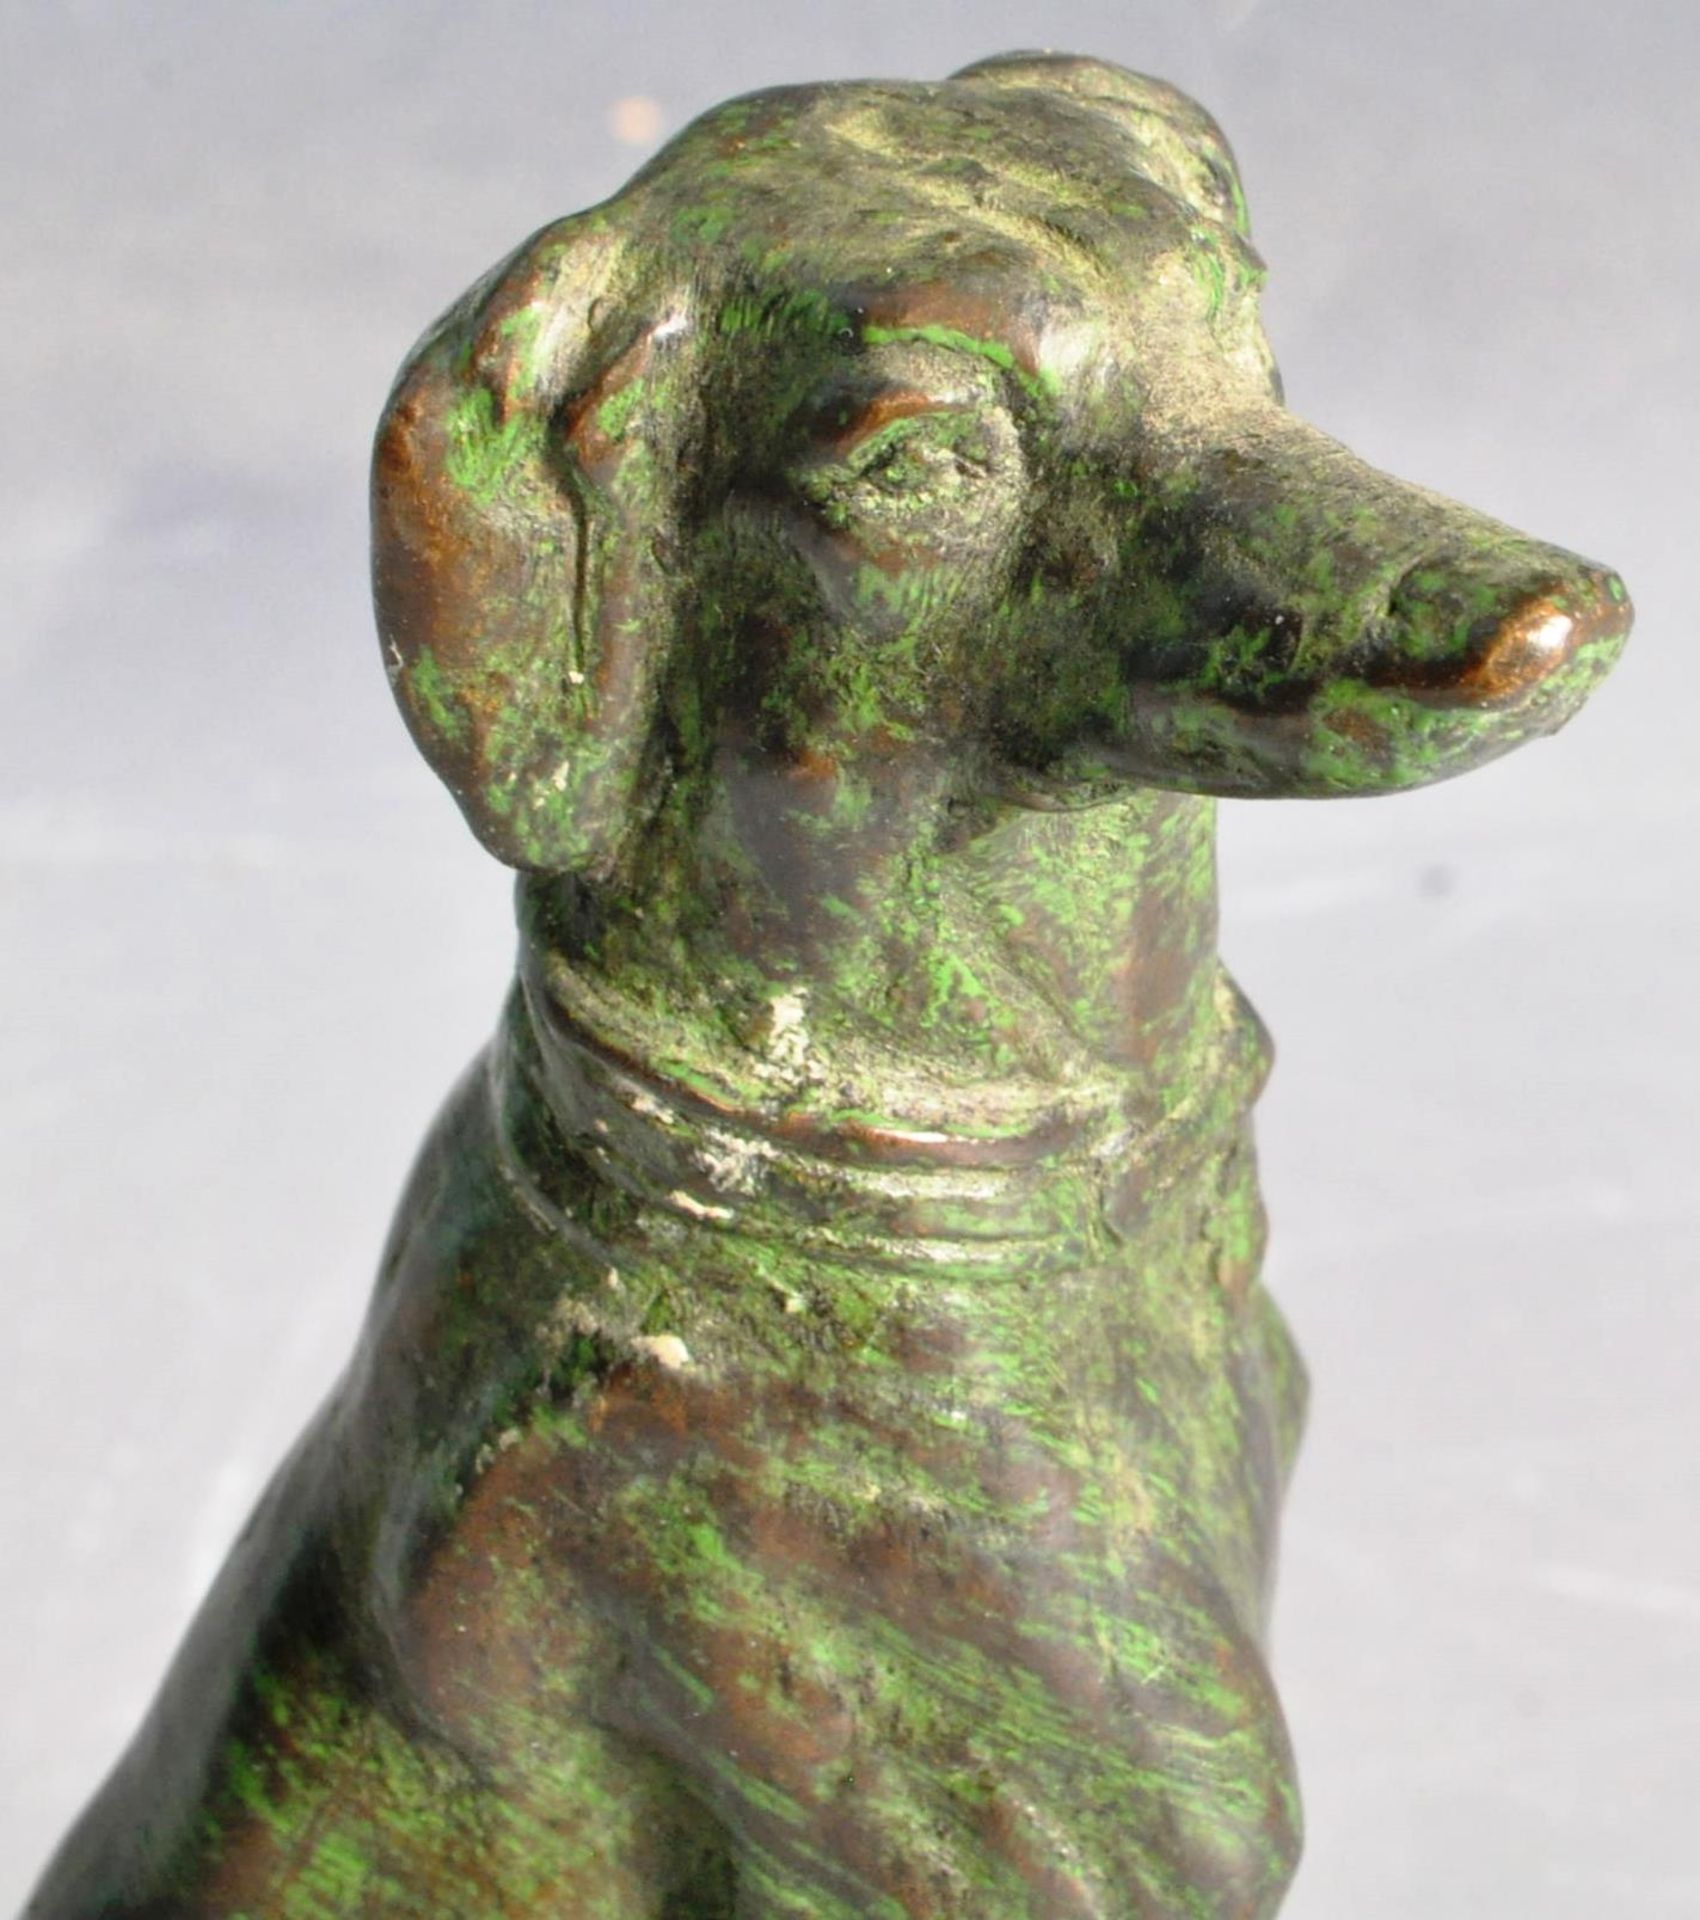 19TH CENTURY BRONZE ORNAMENT FIGURE IN THE FORM OF A GREYHOUND - Image 2 of 5